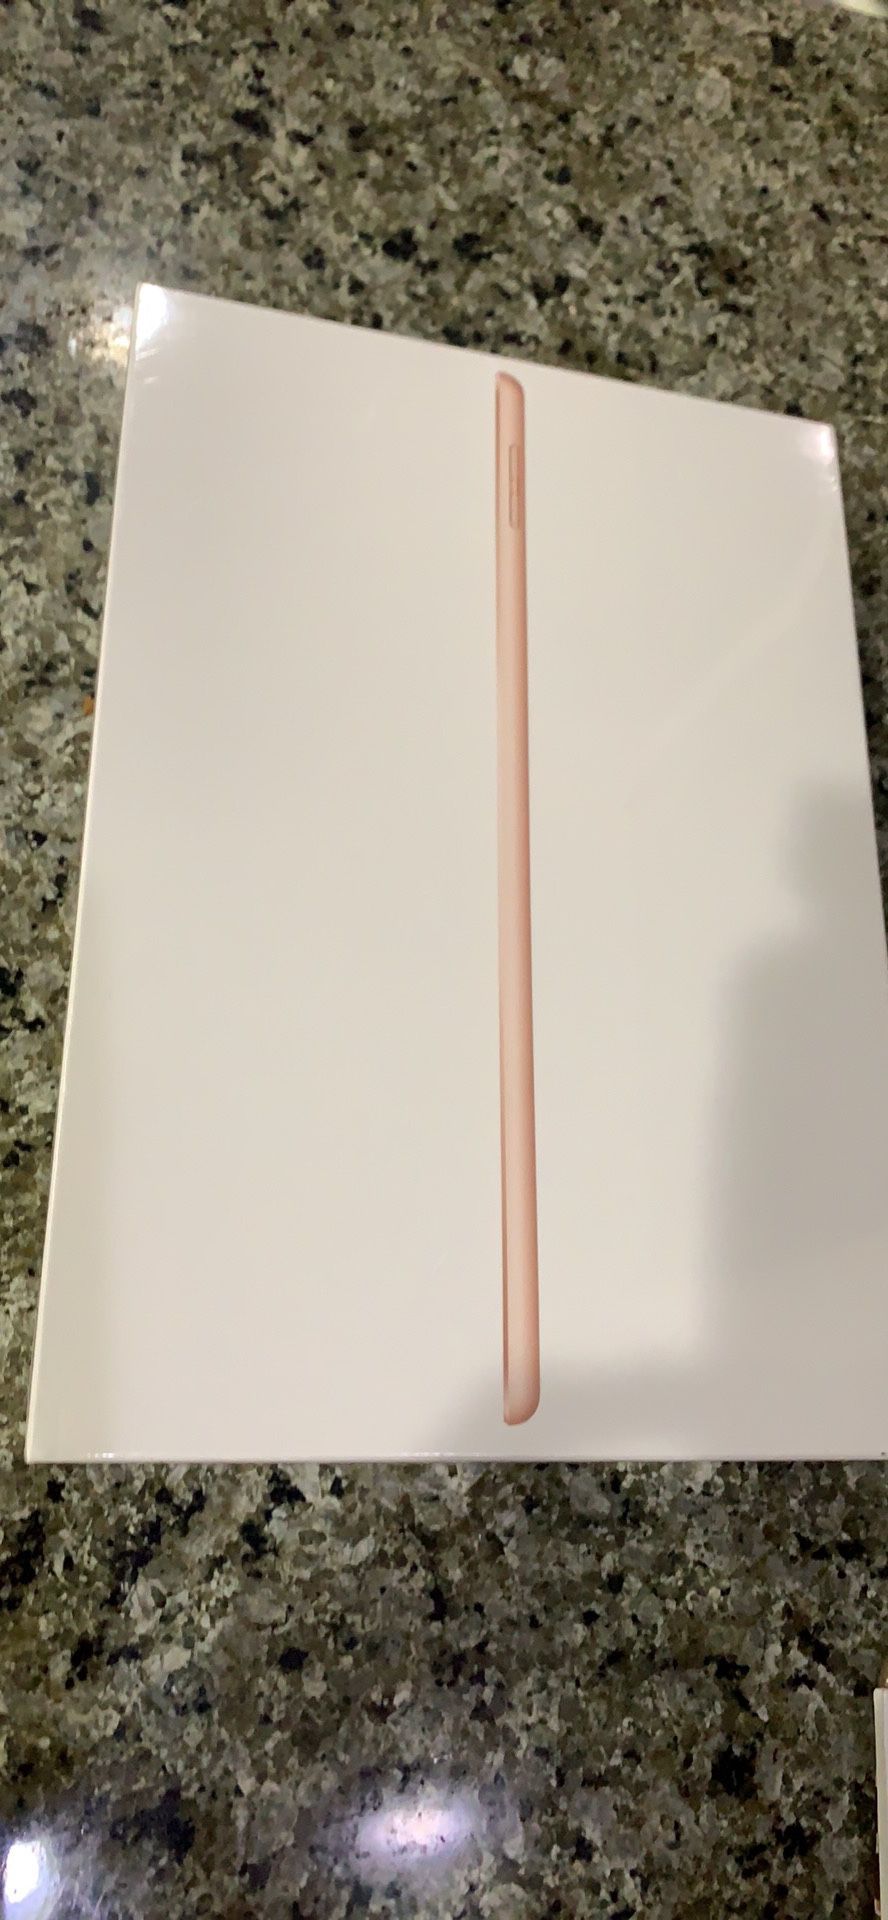 IPad Air third generation newest model 64 sealed rose 🌹 gold 64gb WiFi only